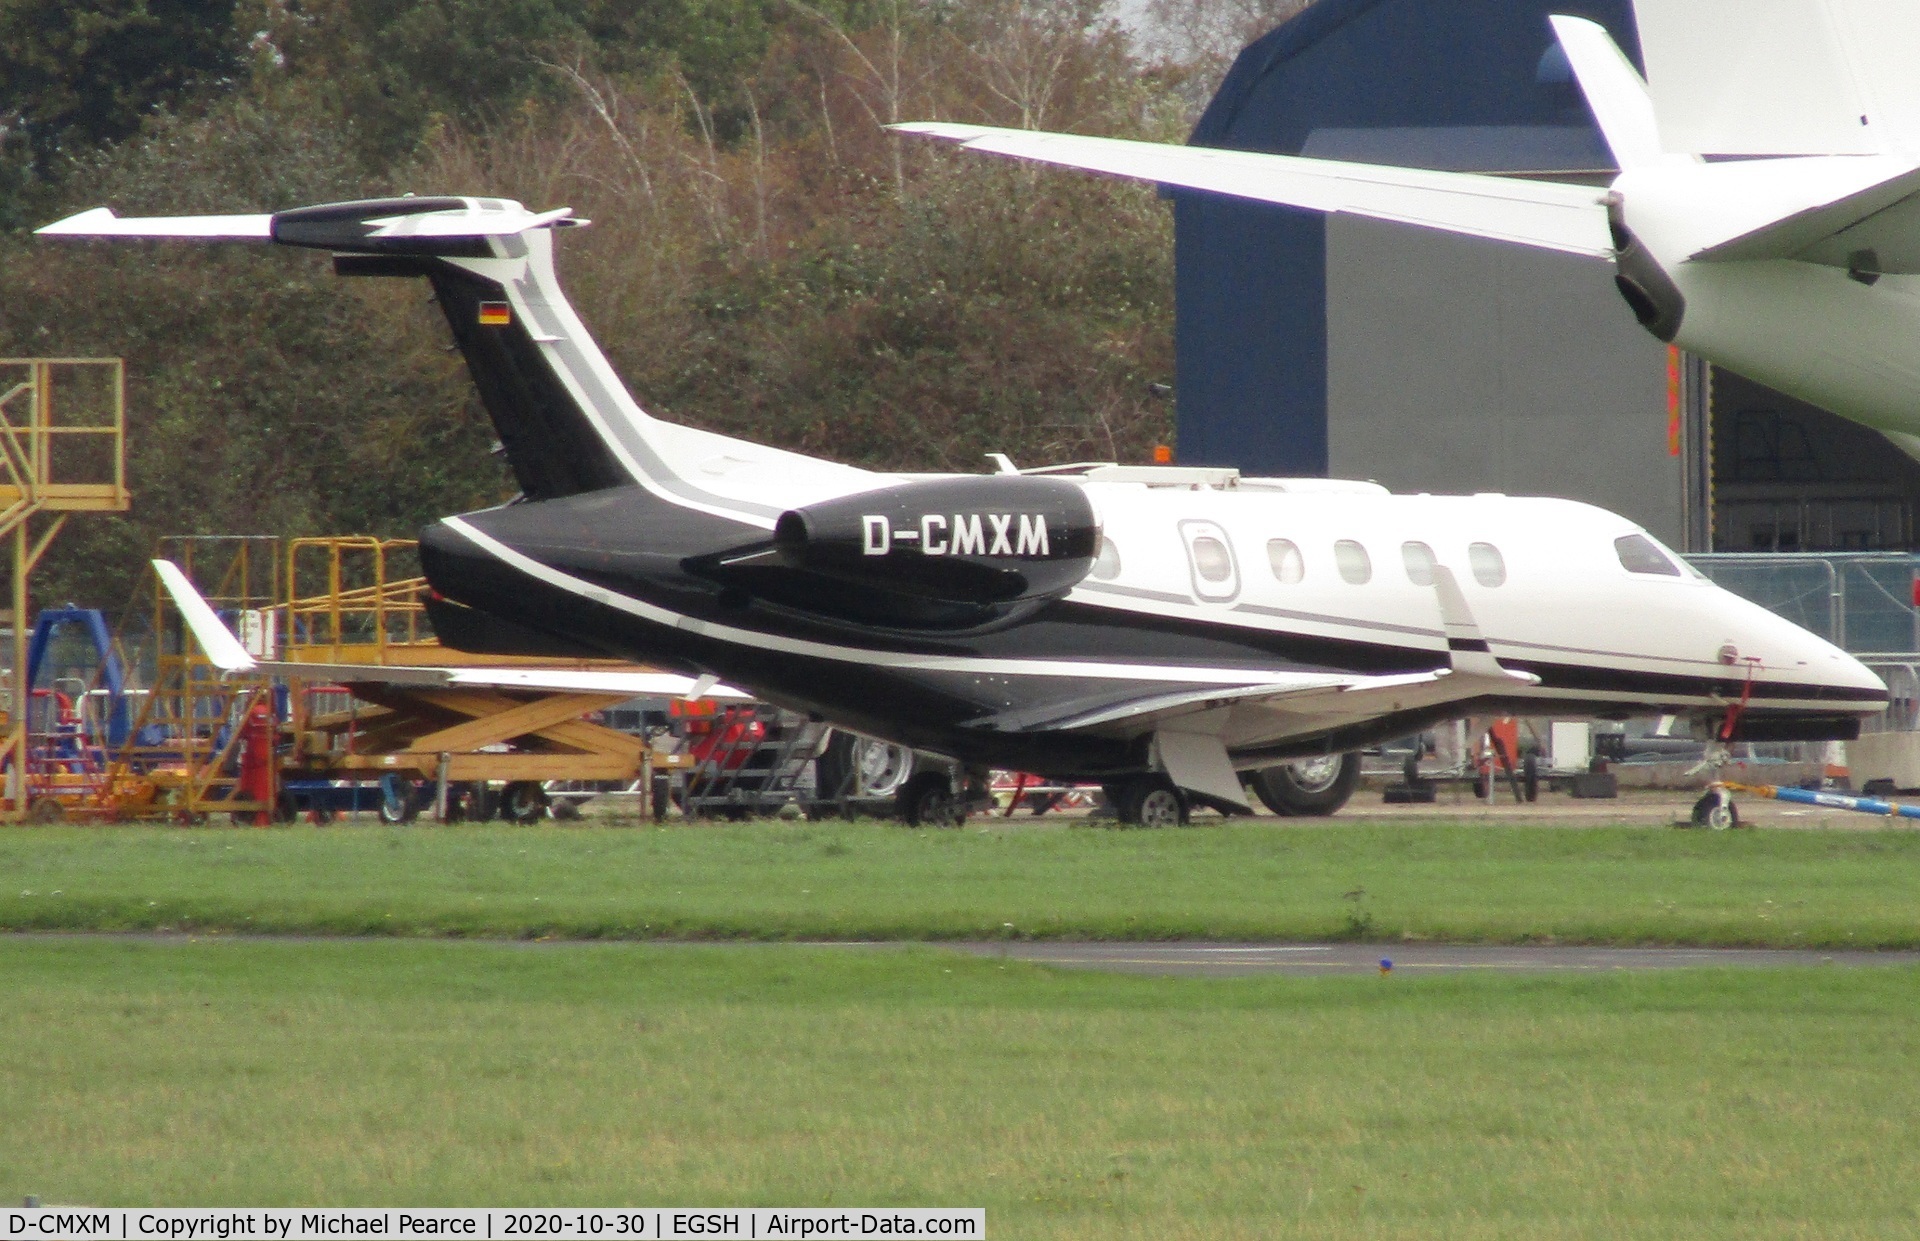 D-CMXM, 2020 Embraer EMB-505 Phenom 300 C/N 50500561, Parked on the Eastern Apron after respray. Note missing rudder.